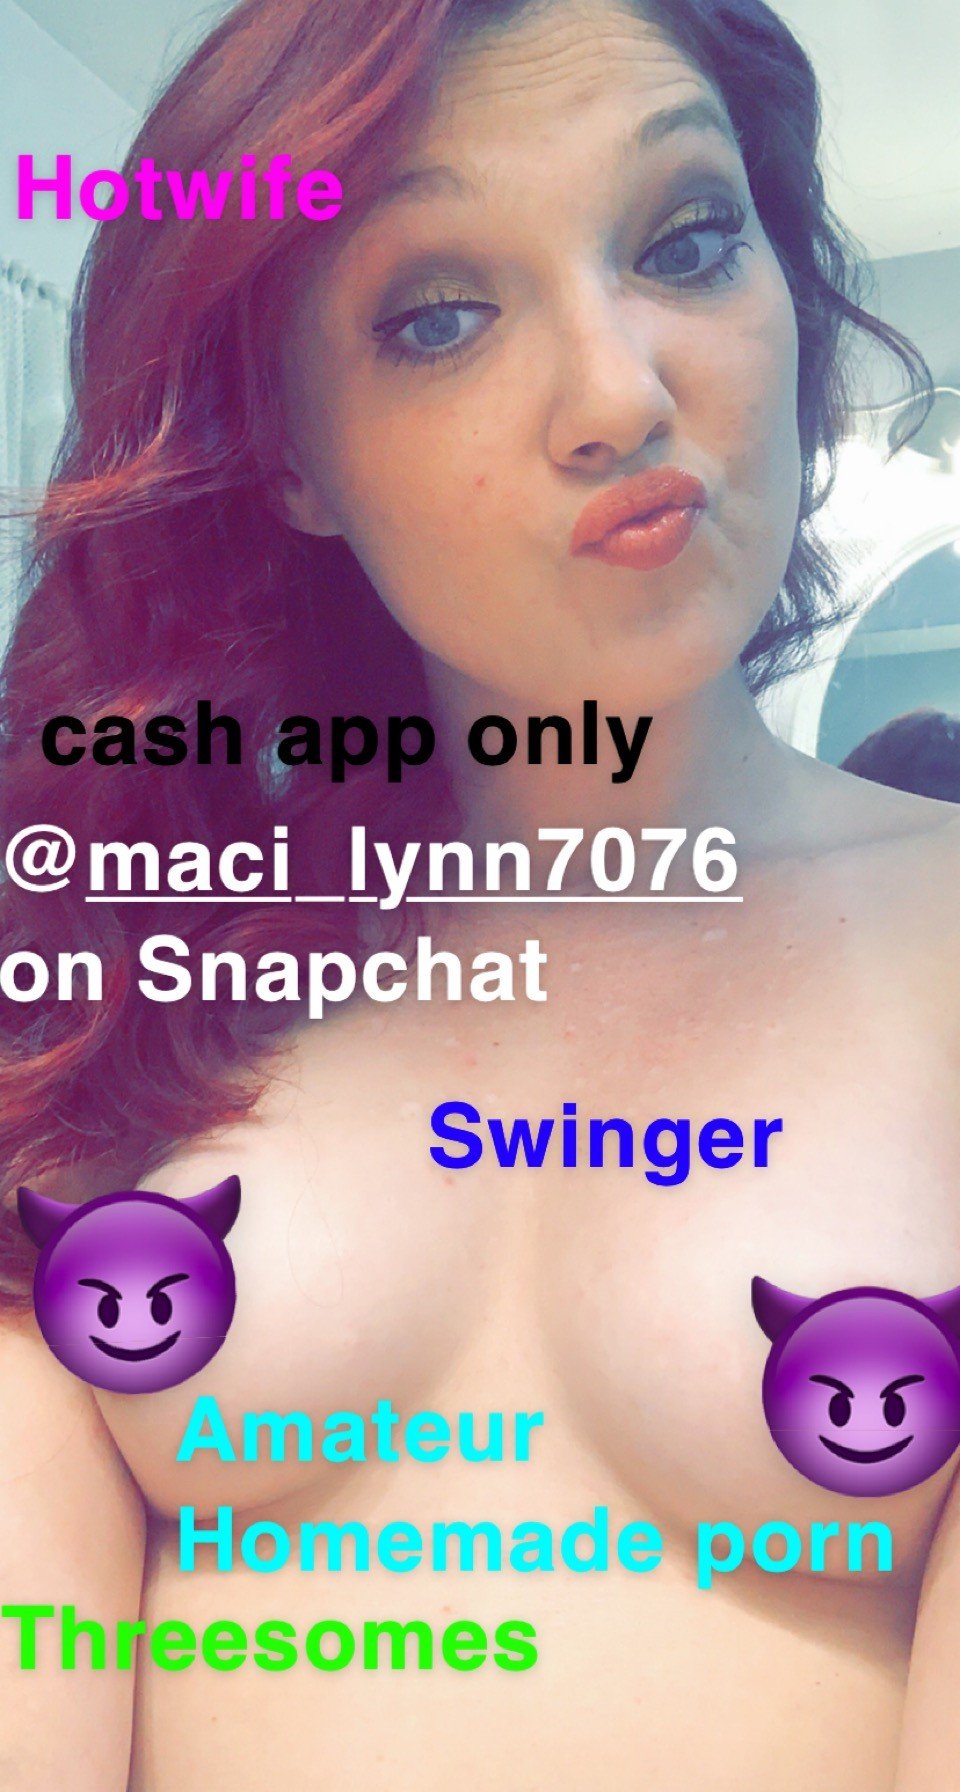 Watch the Photo by Stella rose with the username @Pineappleslutwife, who is a star user, posted on November 15, 2020. The post is about the topic NSFW Snapchat. and the text says 'this my wife yall😍😍😍. bless her cash app and she make it worth your while'